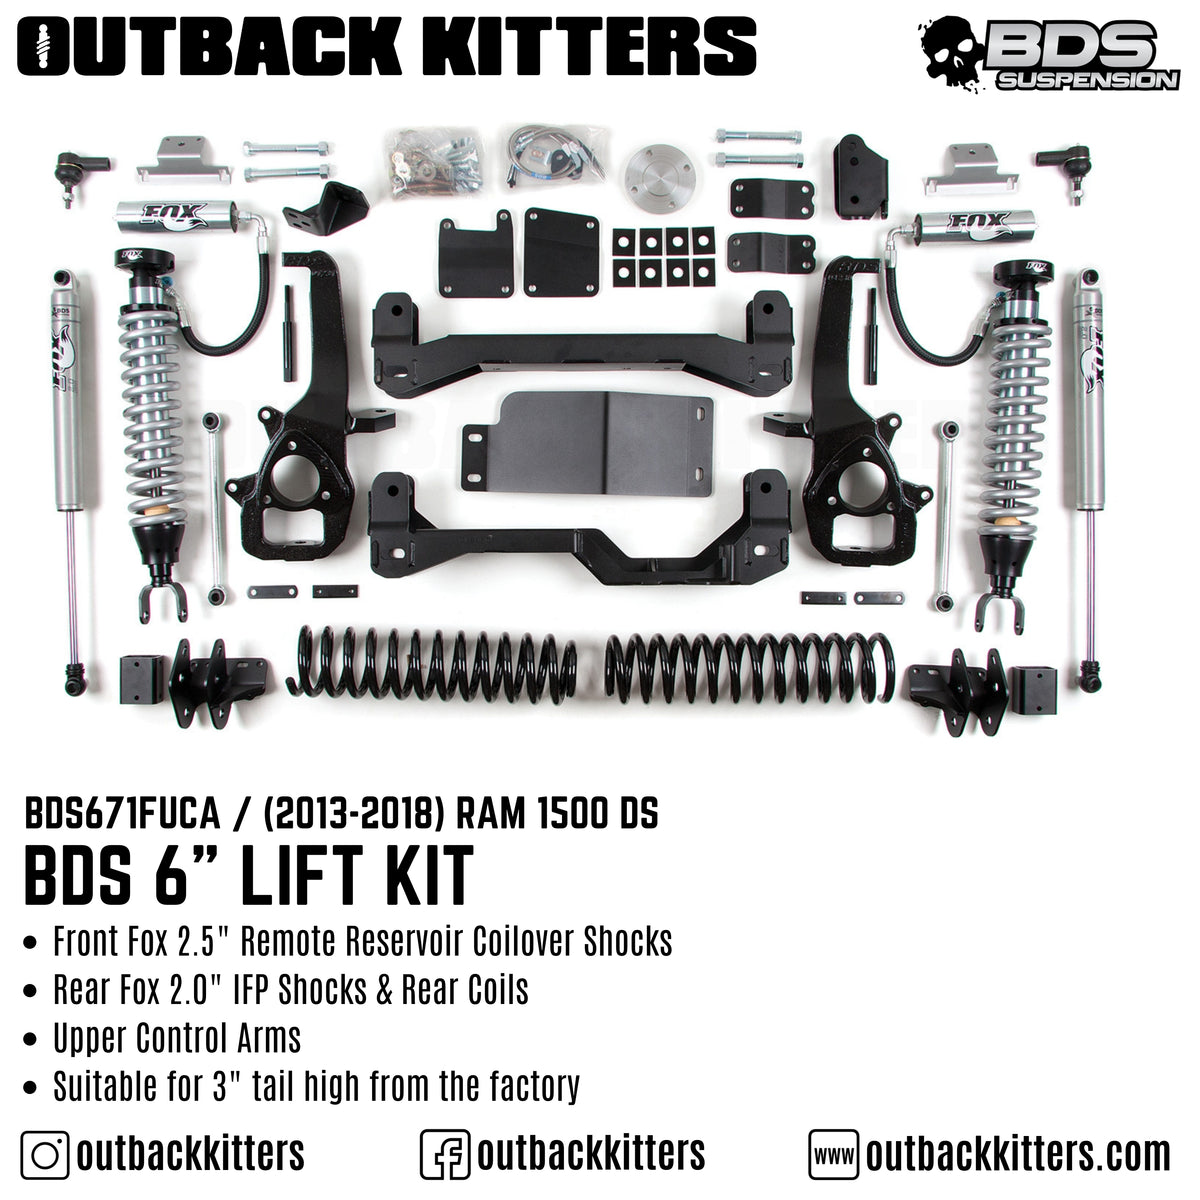 BDS Suspension 6" Lift Kit for Ram 1500 DS - Outback Kitters